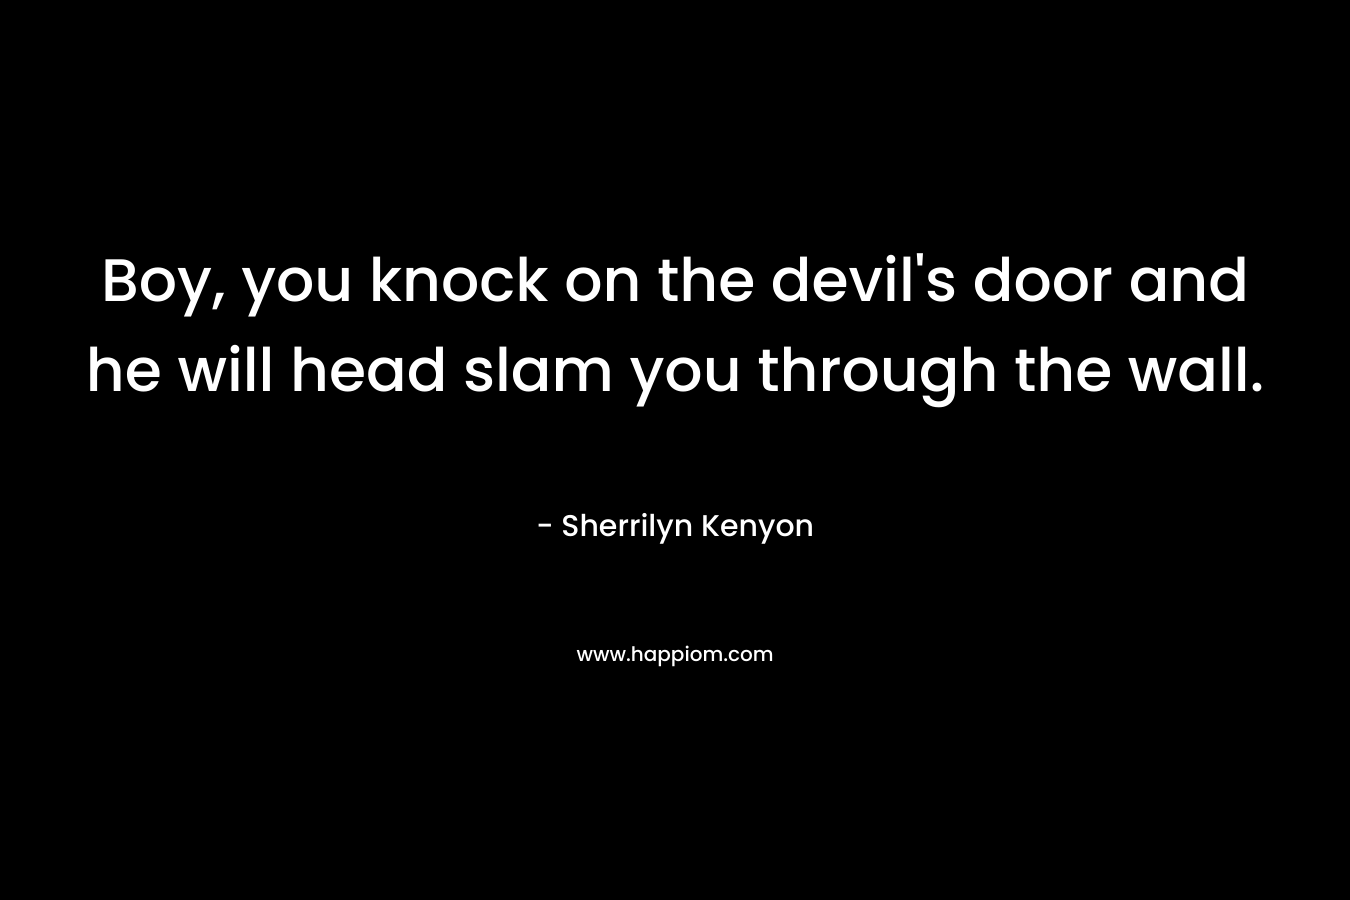 Boy, you knock on the devil's door and he will head slam you through the wall.